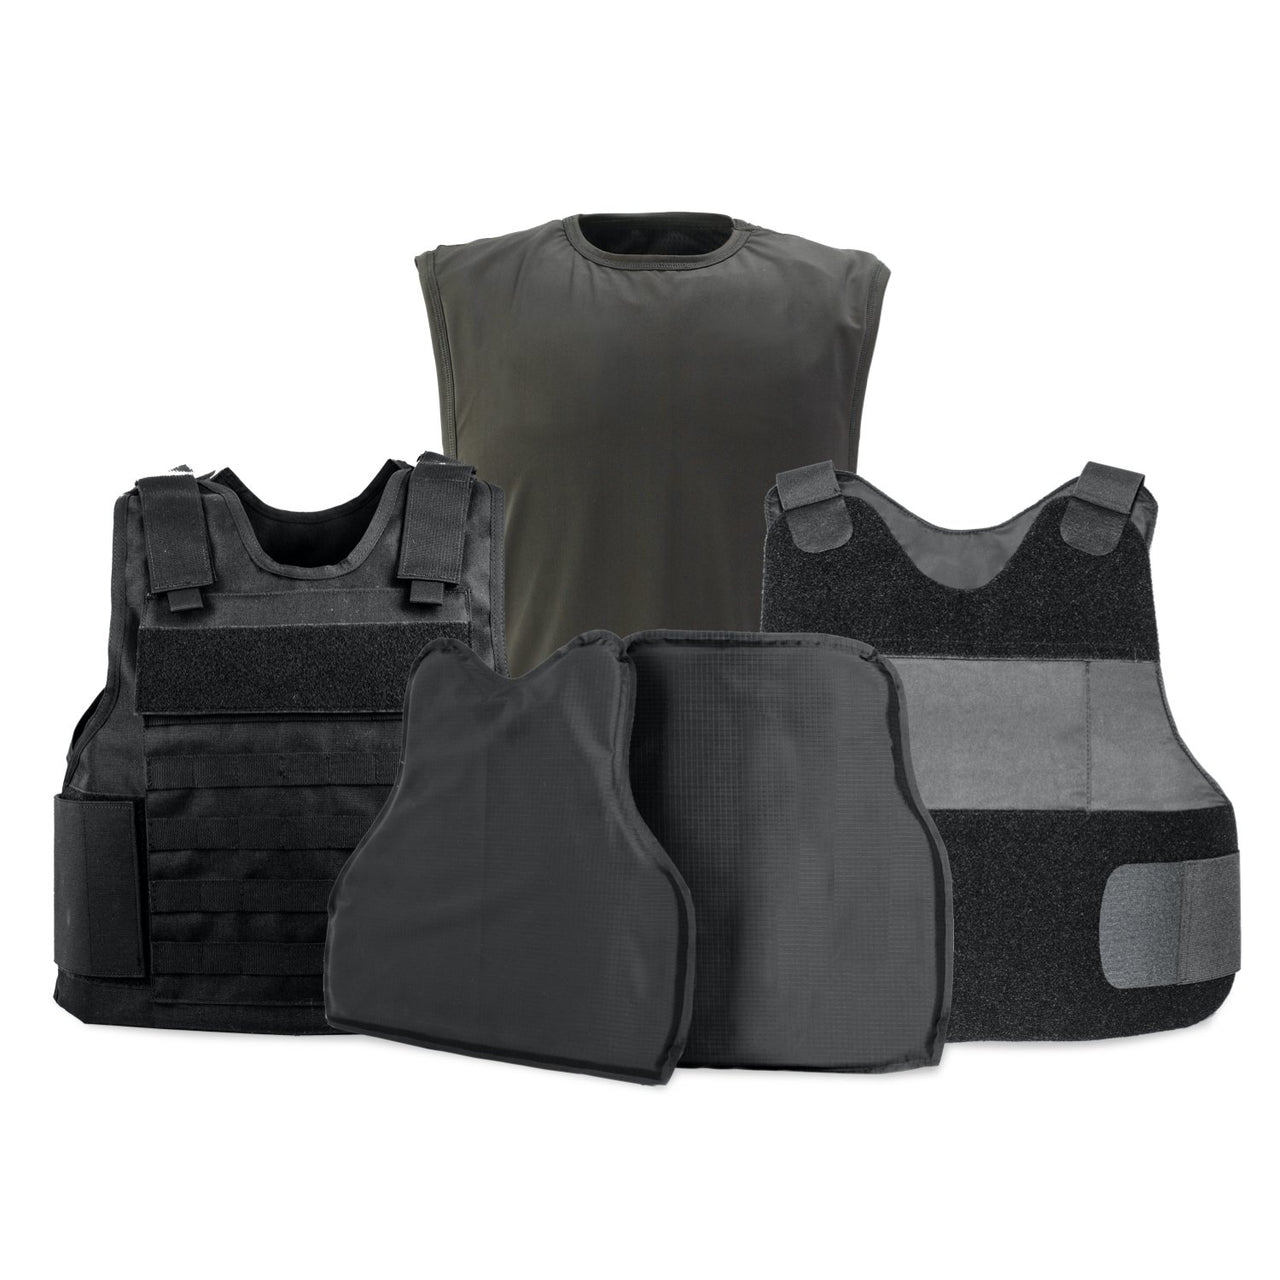 Four different types of Body Armor Direct Bundle #1: Freedom Concealable Vests, All Star Tactical Carriers, and VIP T-Shirt Carriers on a white background.